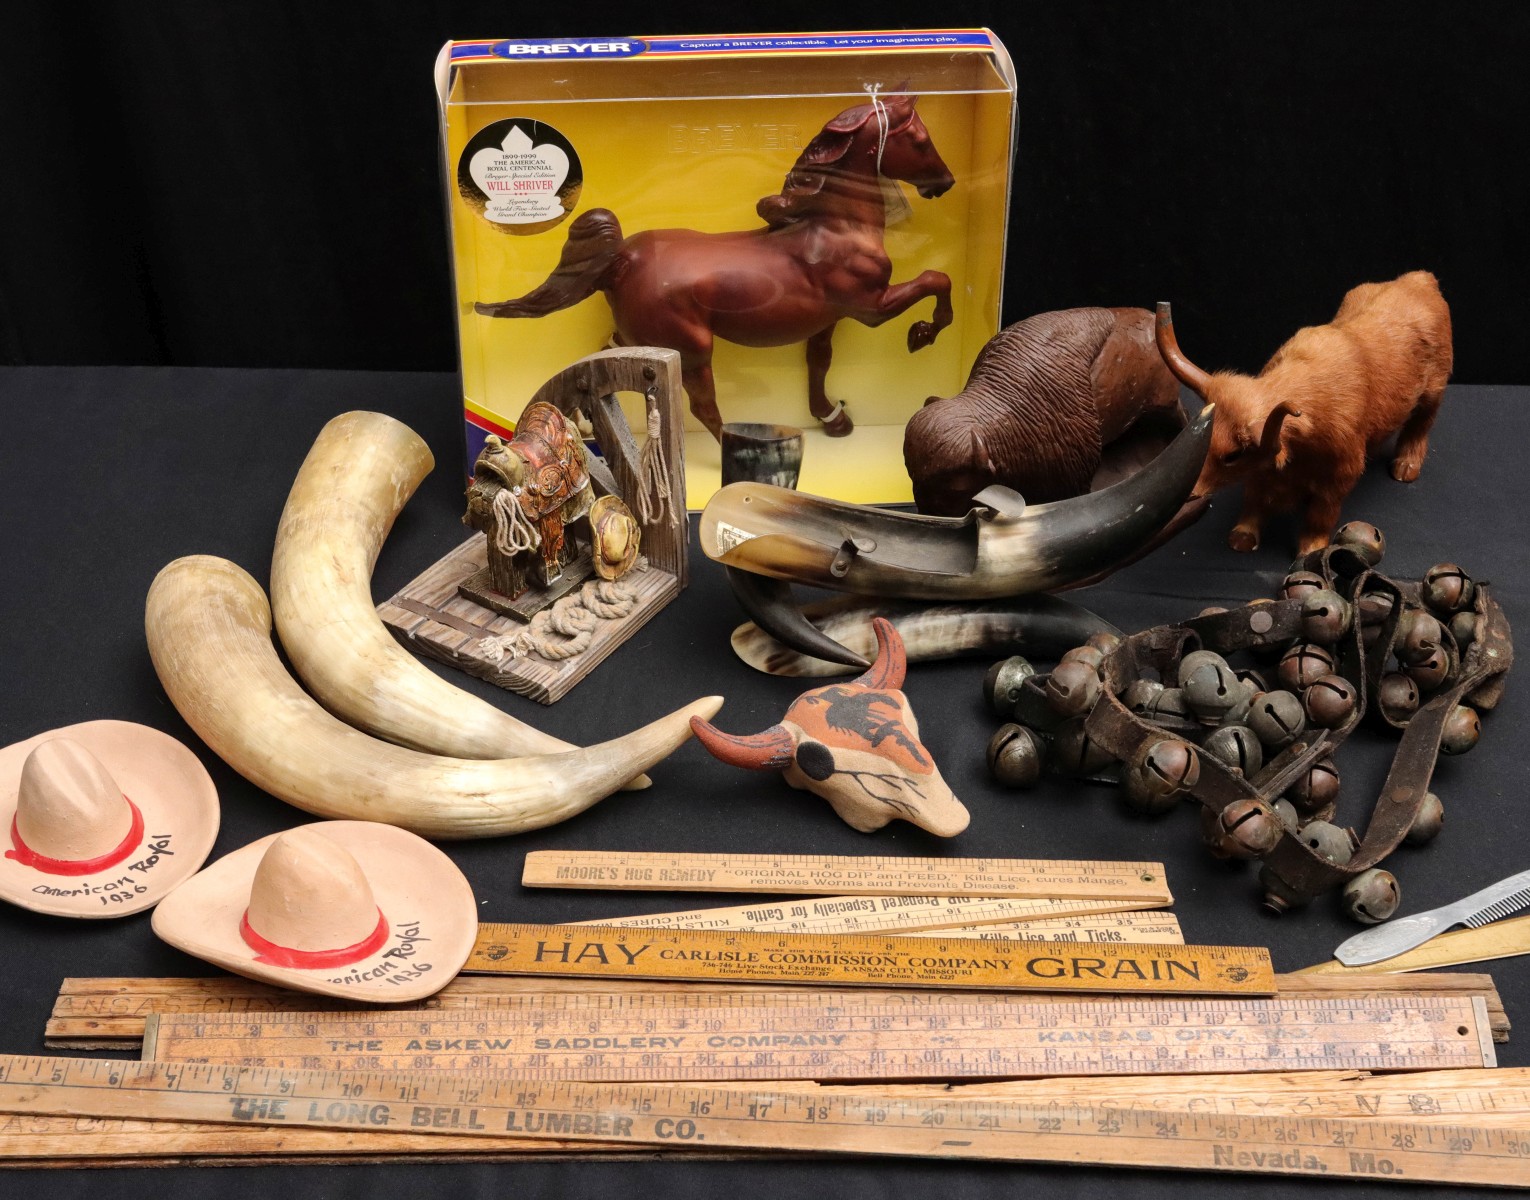 MISCELLANEOUS COWBOY AND WESTERN MOTIF COLLECTIBLES